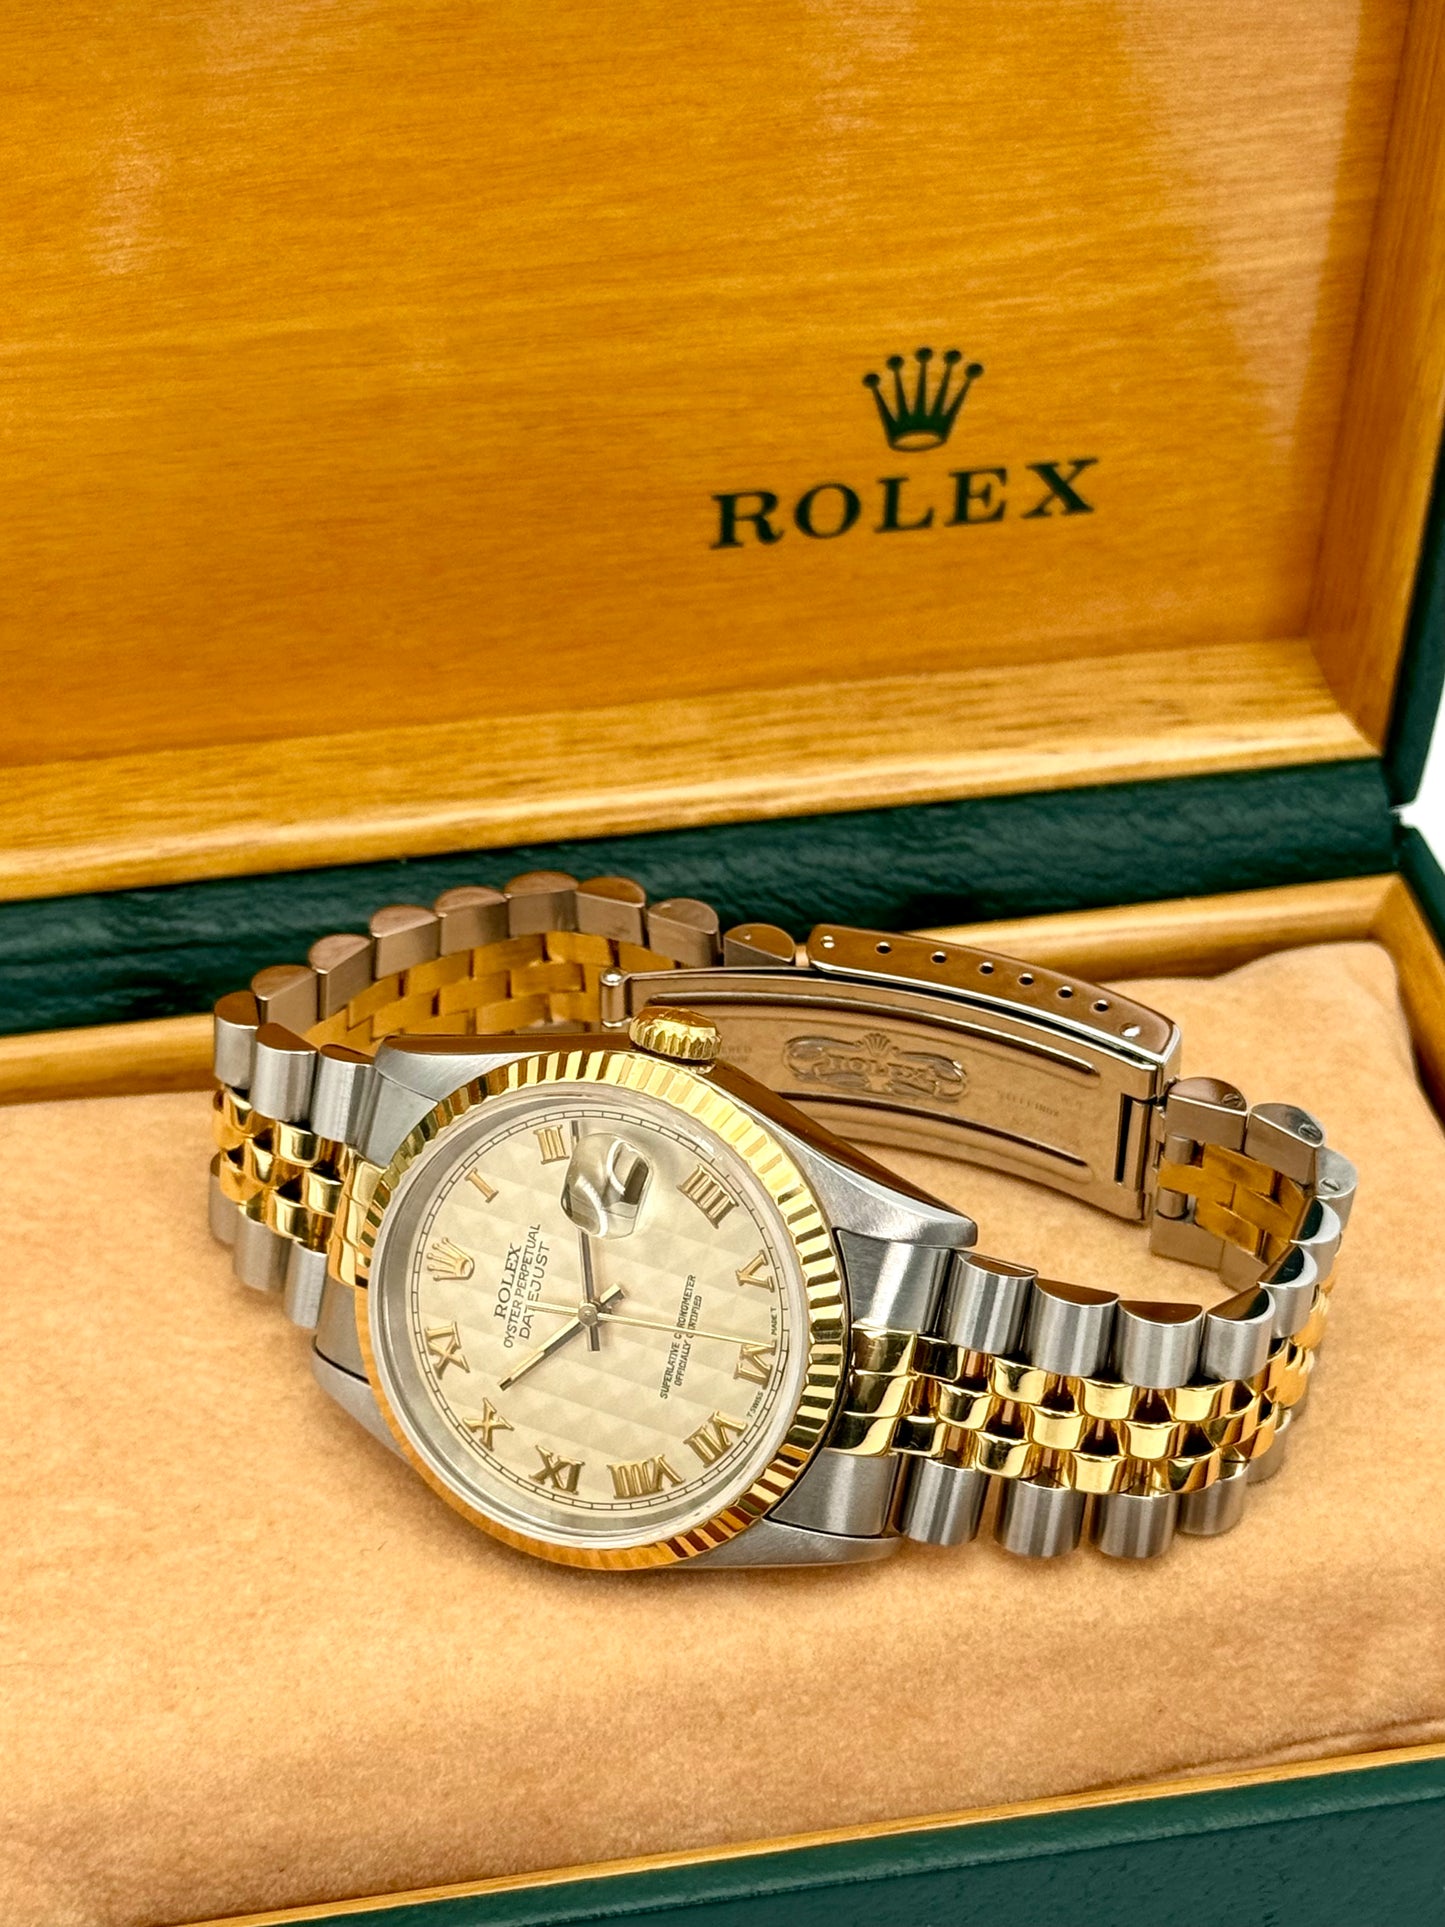 1995 Rolex Datejust 36mm 16233 Two-Tone White Pyramid Dial